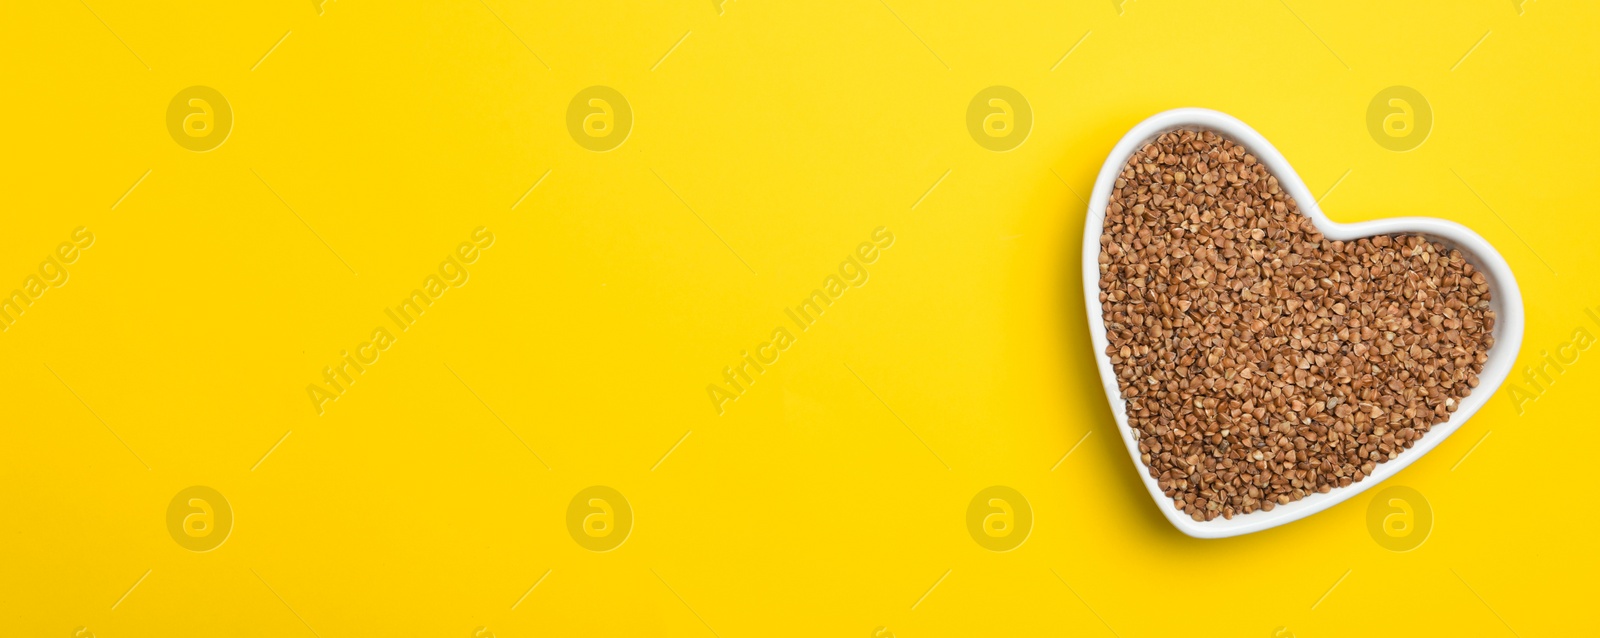 Image of Buckwheat grains on yellow background, top view with space for text. Banner design